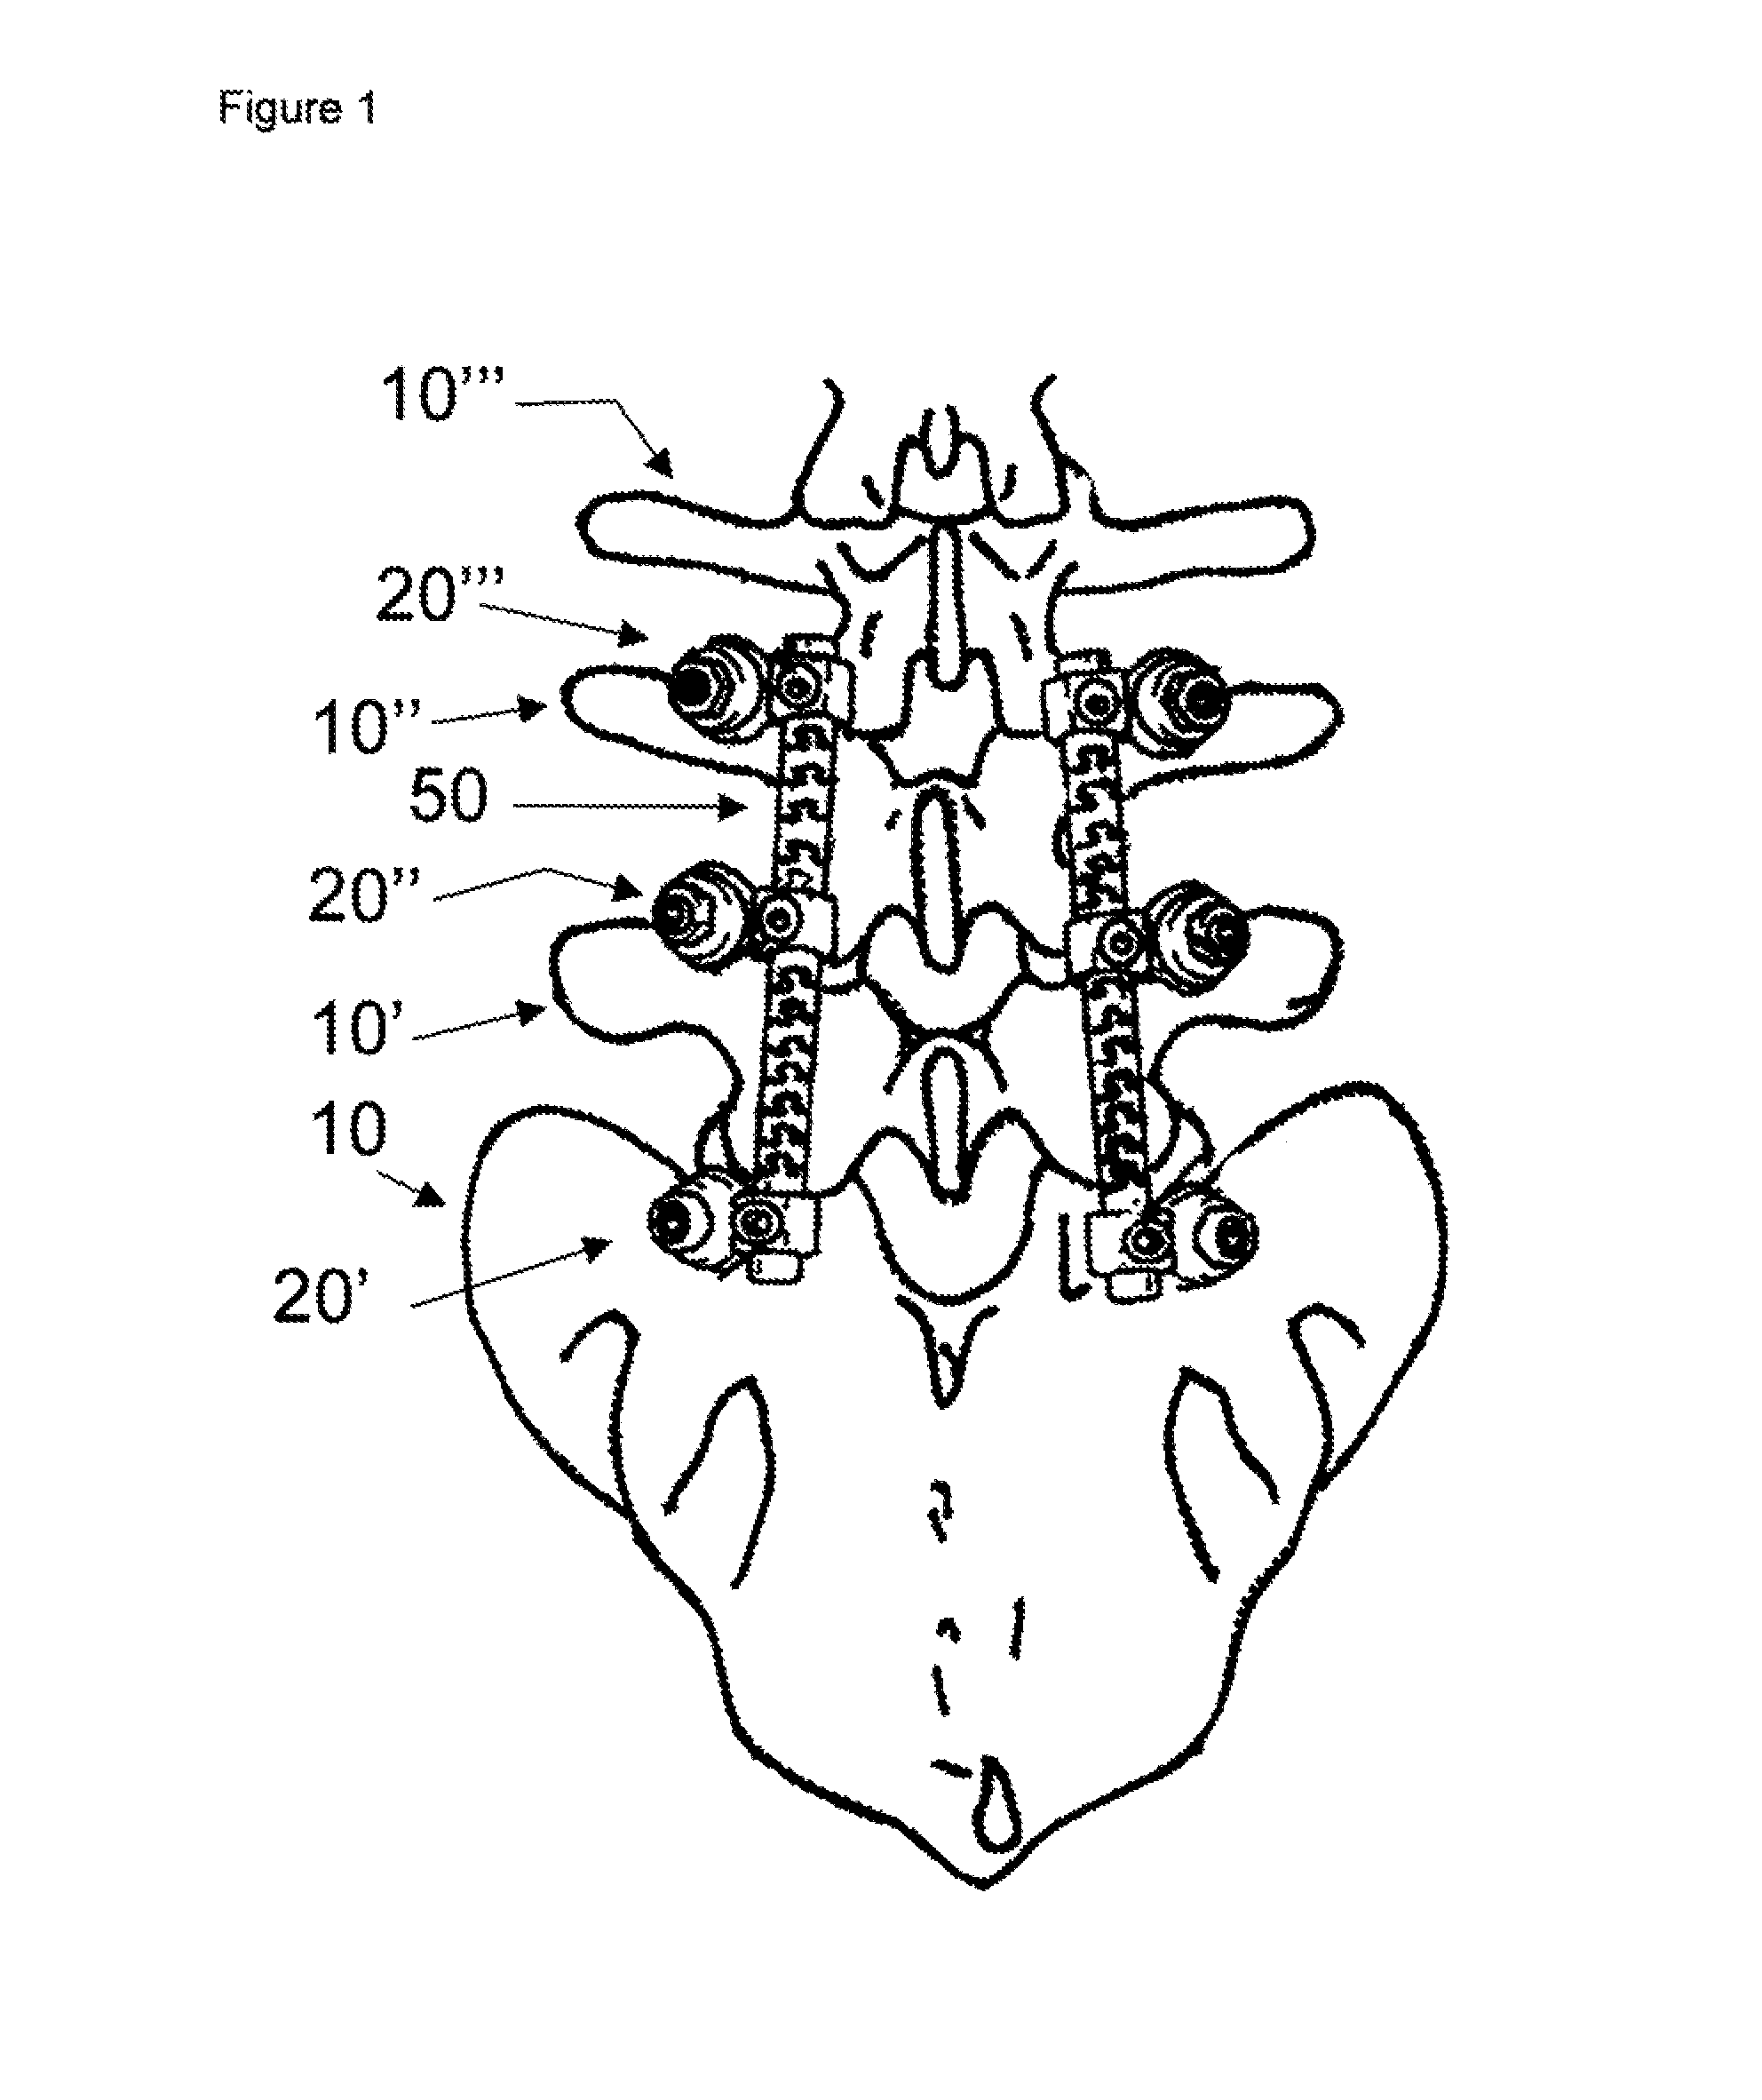 Flexible spine components having a concentric slot